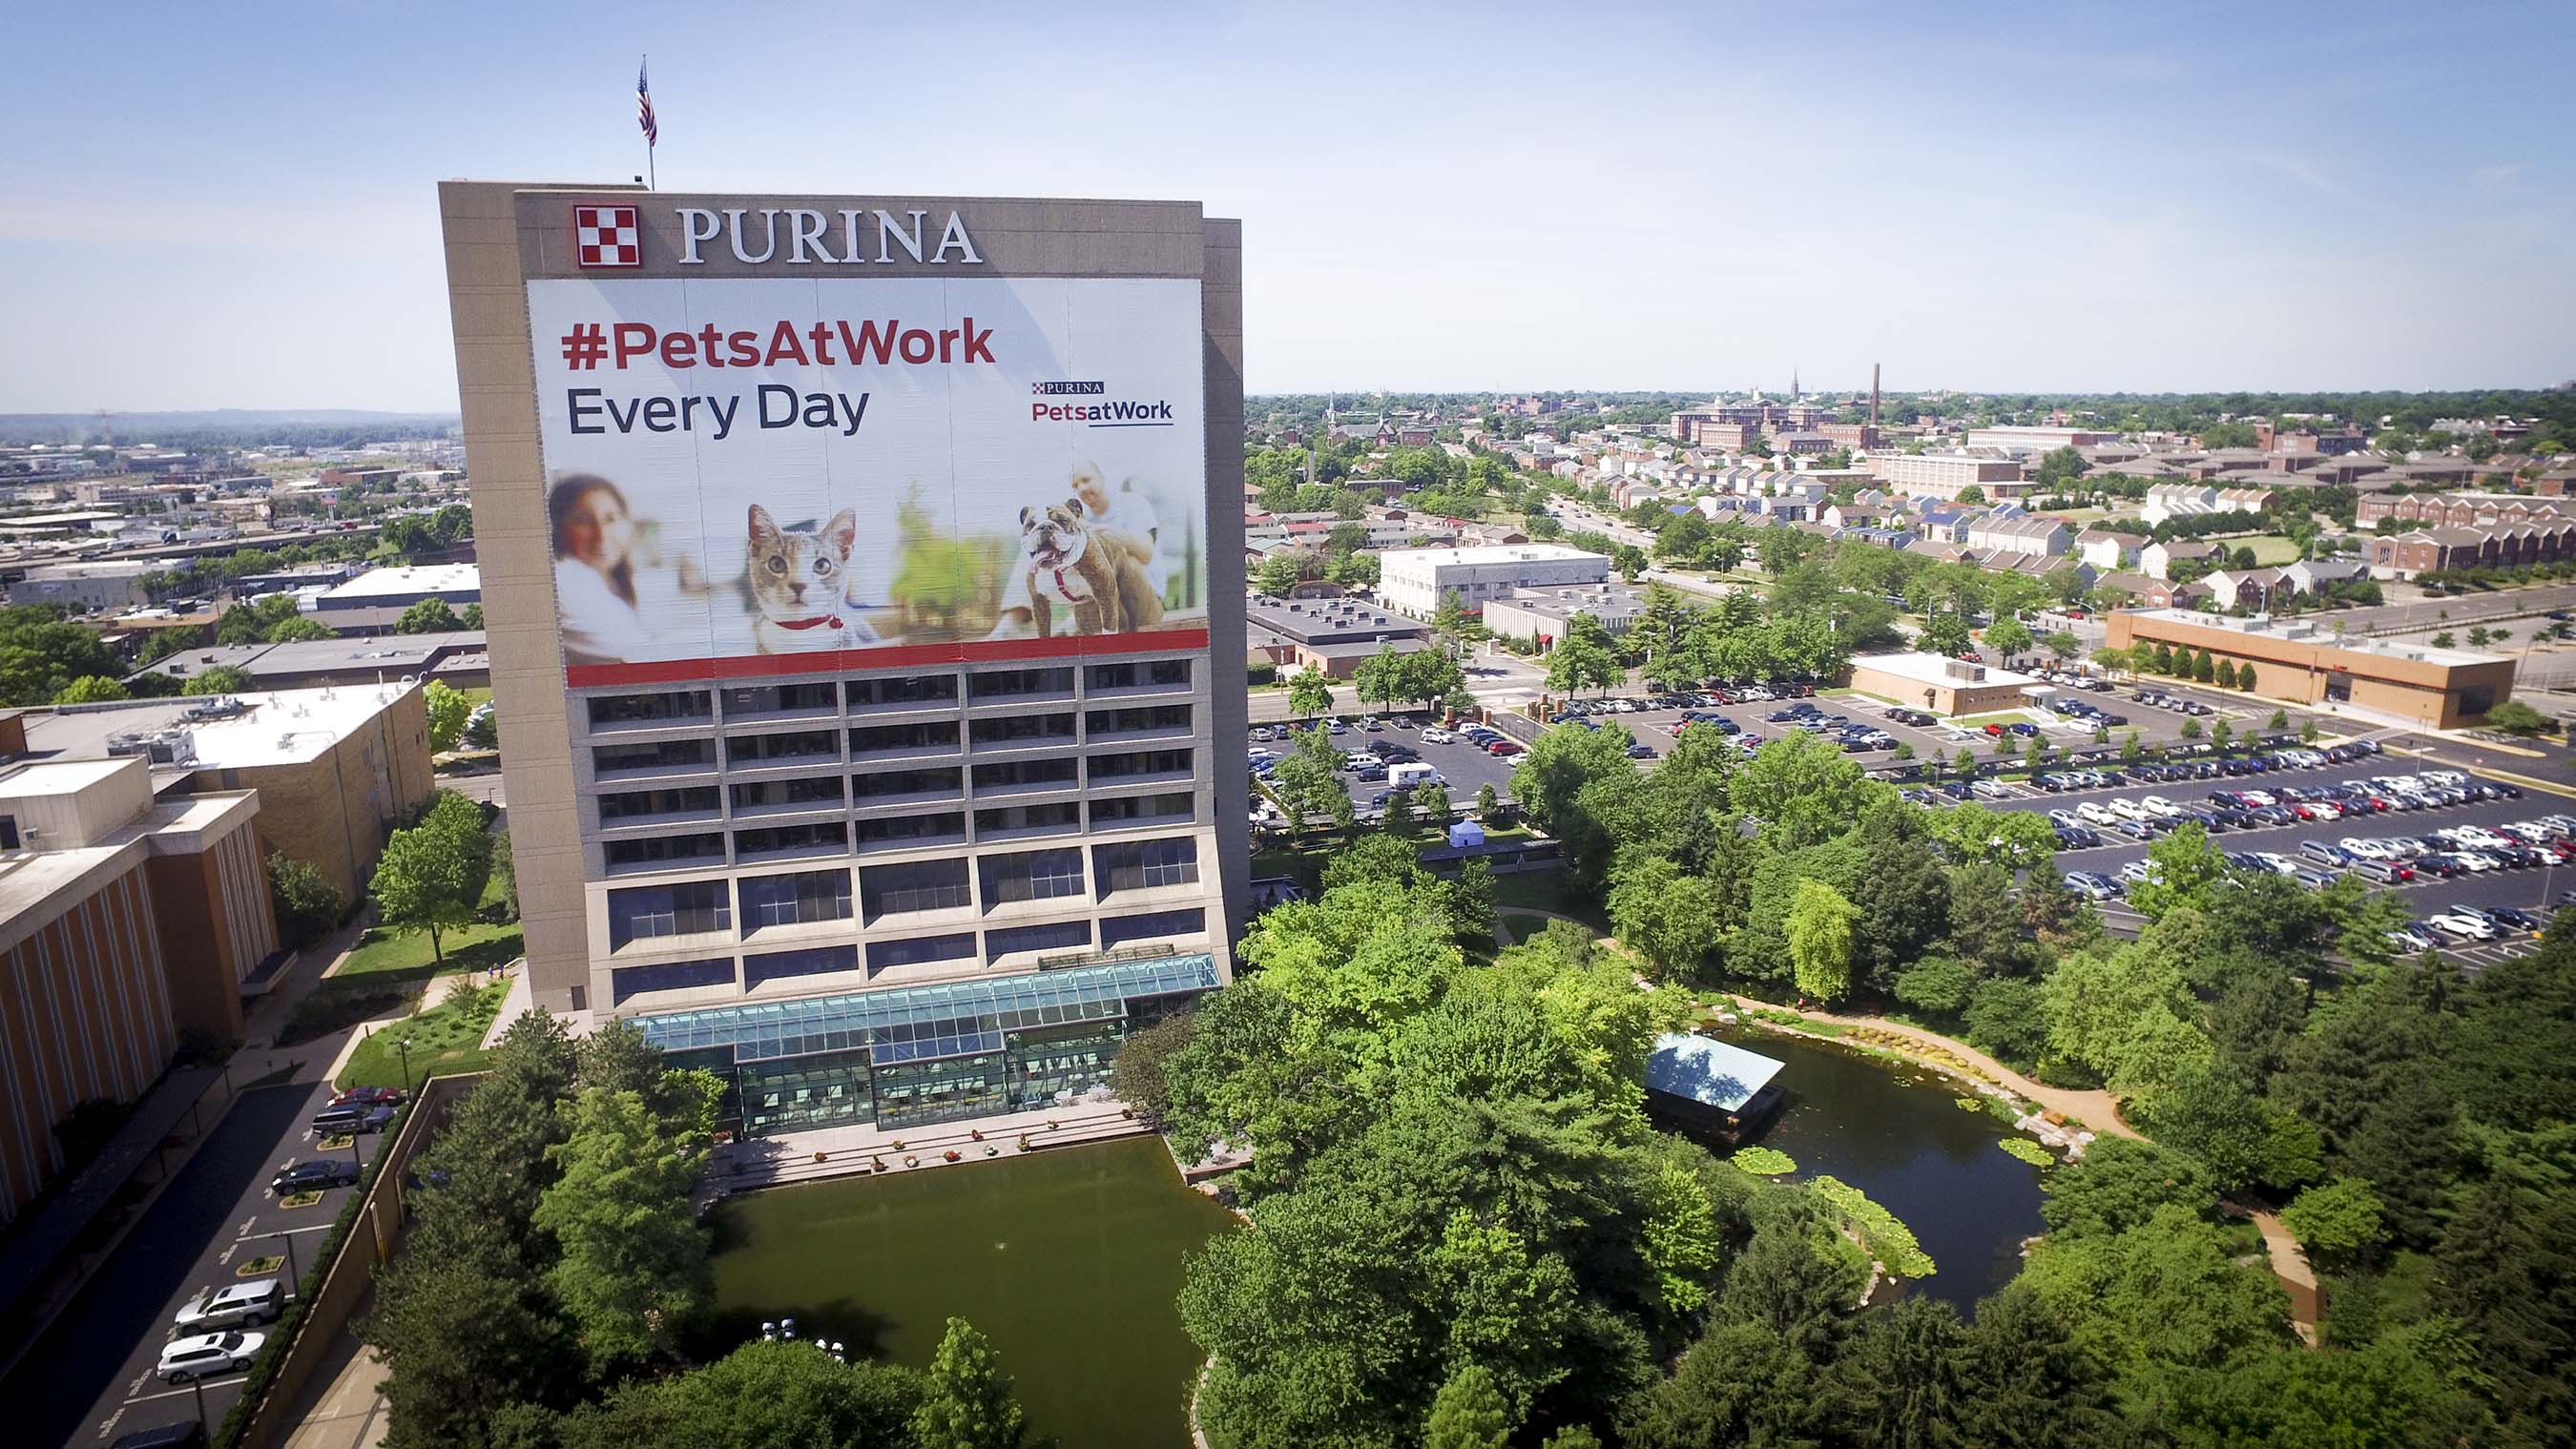 “Pets are part of our everyday lives, and it excites us to collaborate with other companies who share our belief that pets and people are better together” said Dr. Kurt Venator, Purina veterinarian.